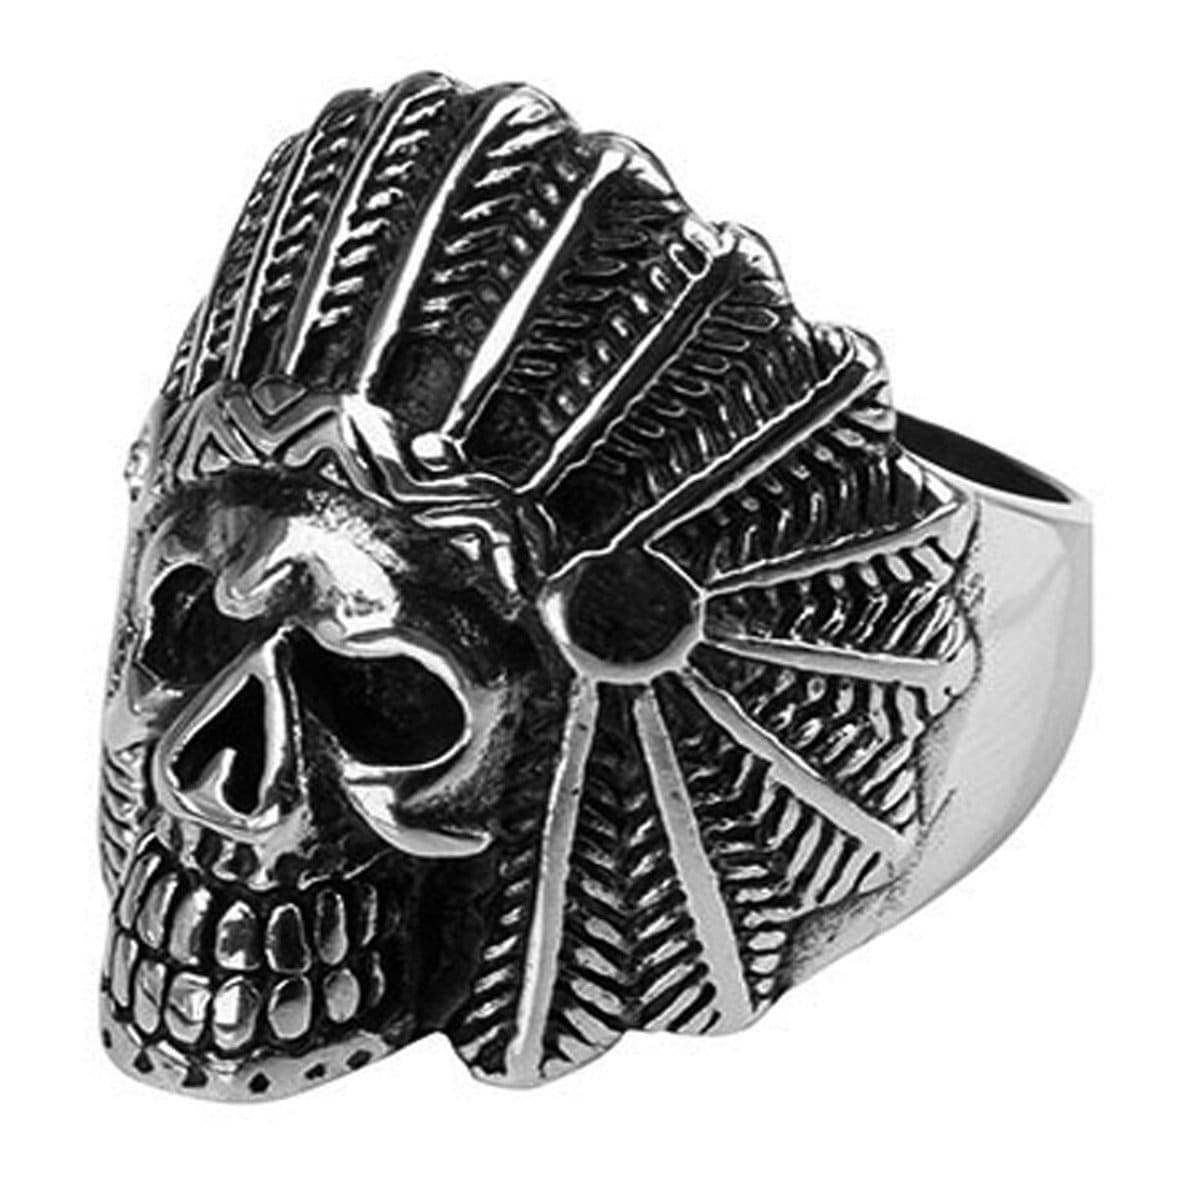 INOX JEWELRY Rings Antiqued Silver Tone Stainless Steel Native American Chief Skull Ring